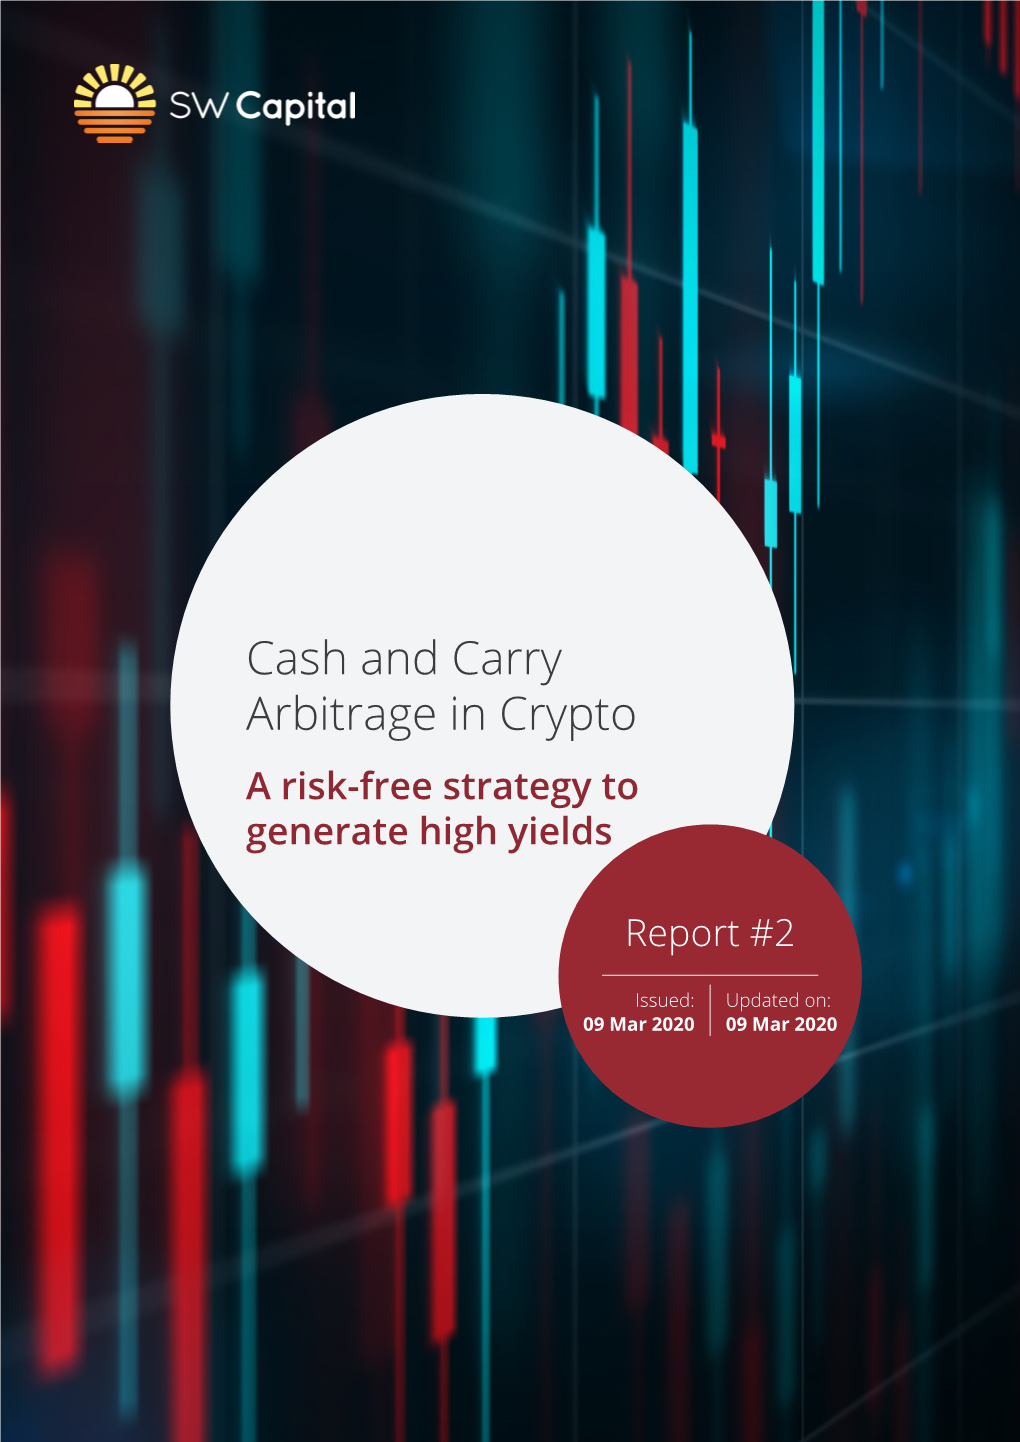 Cash and Carry Arbitrage in Crypto a Risk-Free Strategy to Generate High Yields